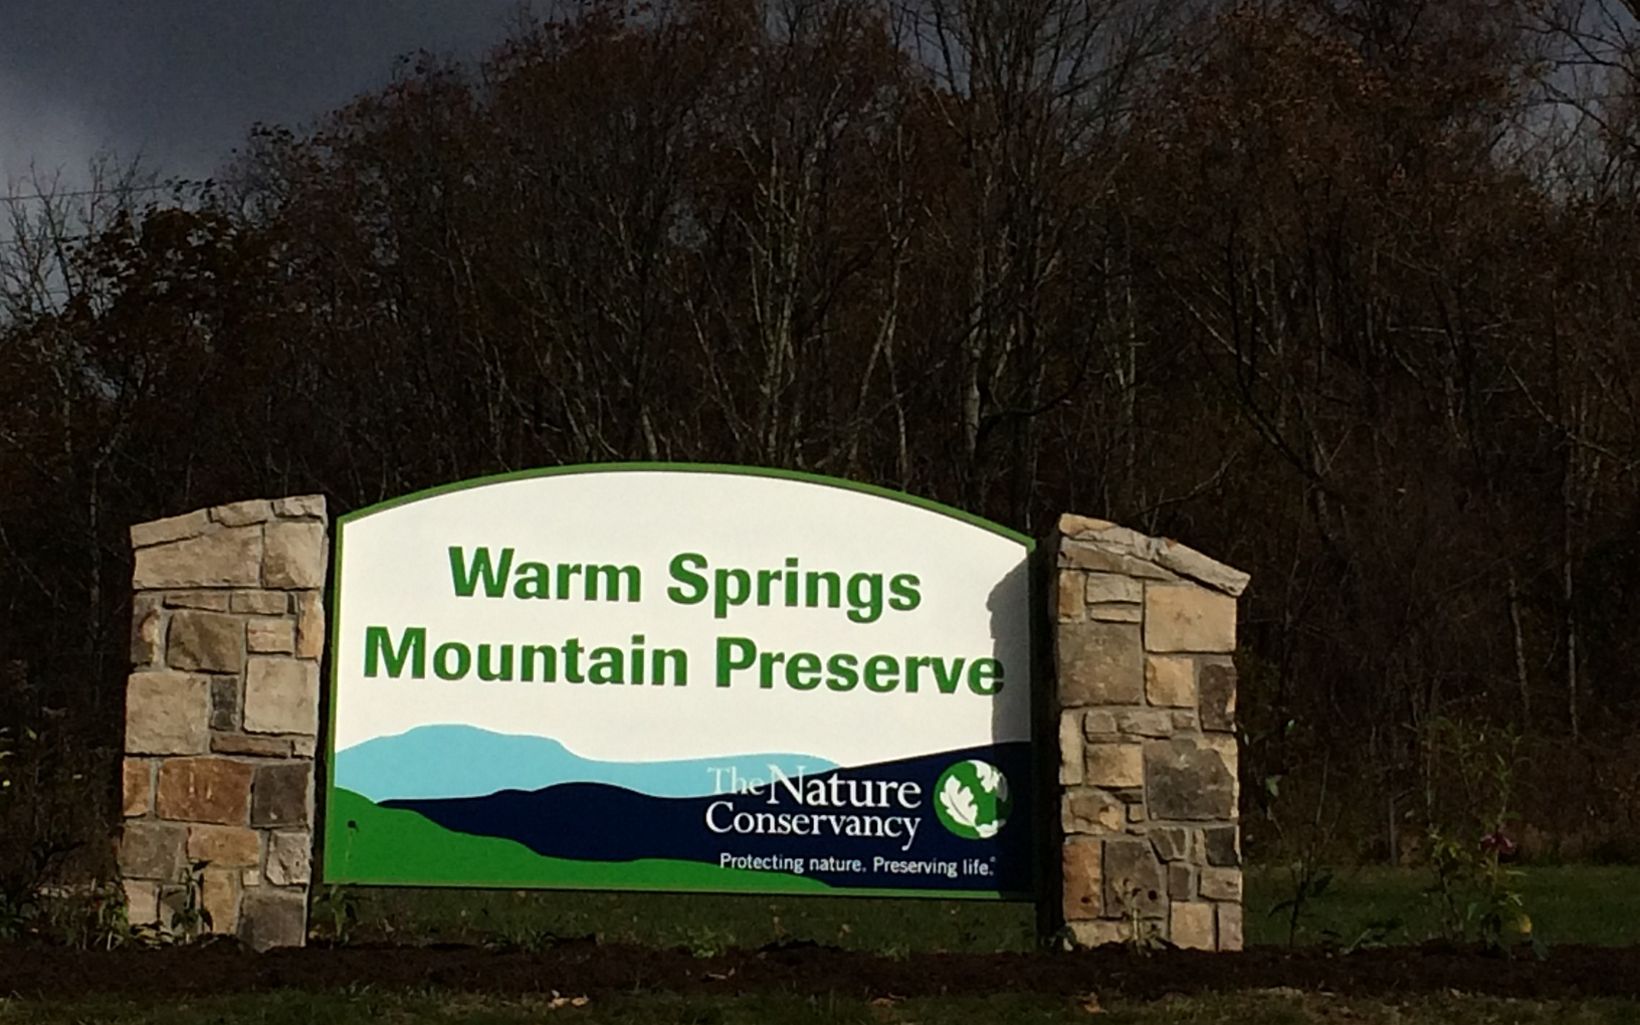 A large sign held up by two stone pillars welcomes visitors. The sign reads Warm Springs Mountain Preserve. At the bottom is stylized mountain graphic with the TNC logo in the corner.